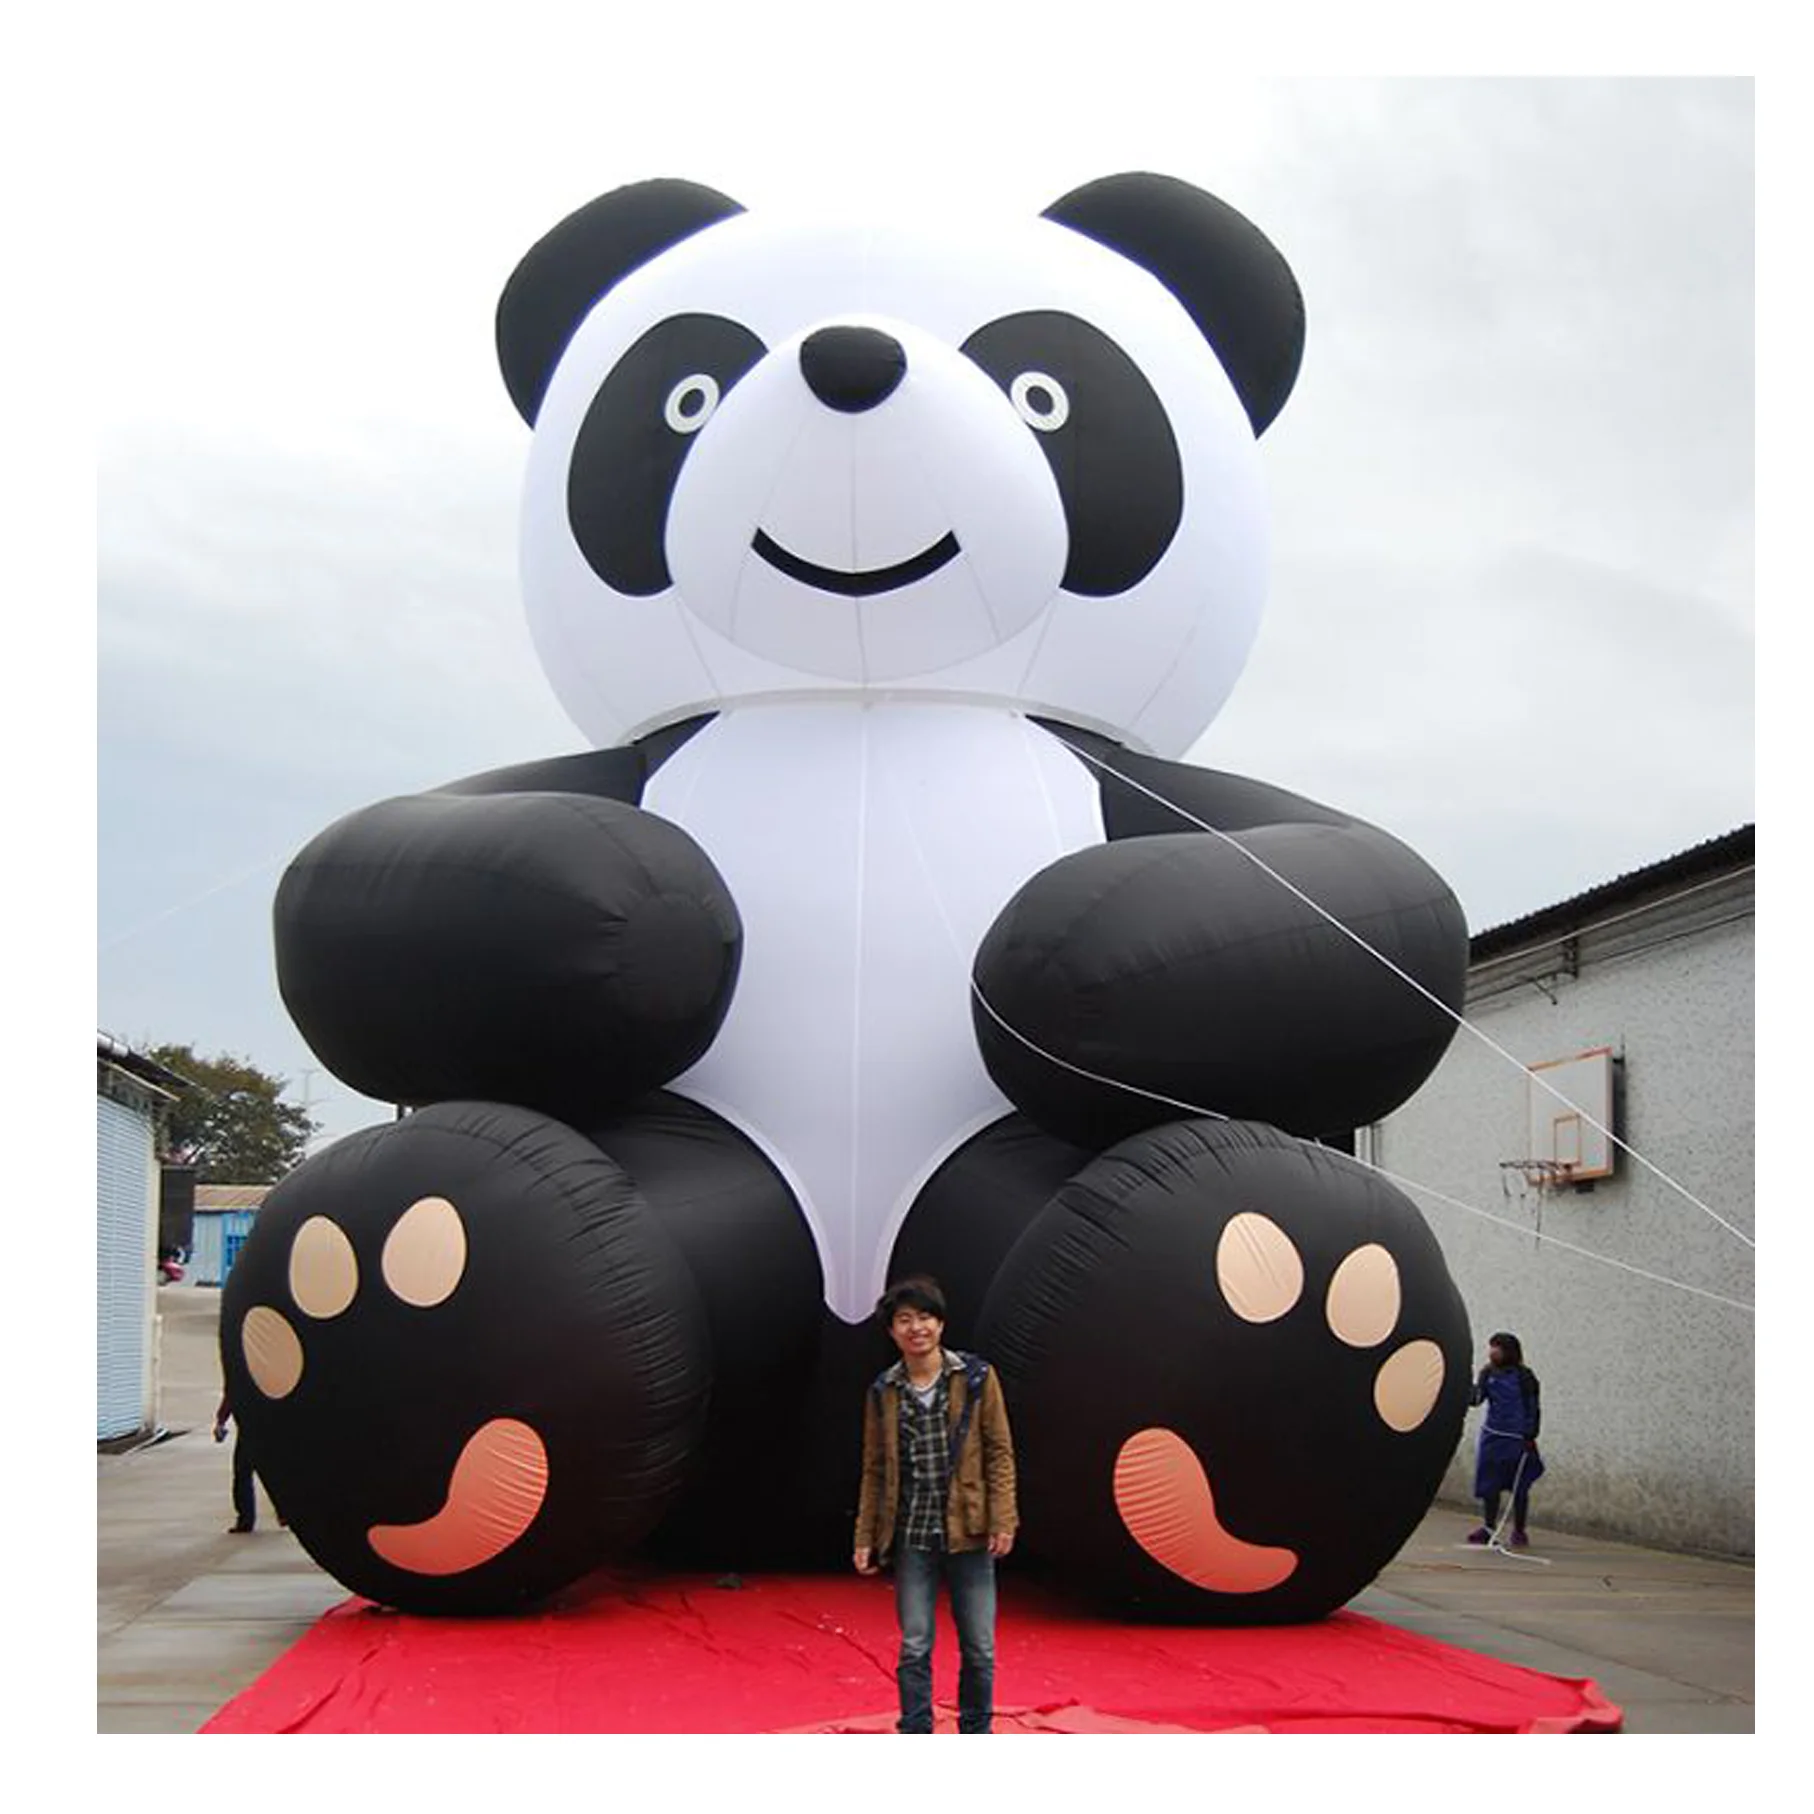 20ft Tall Lovely Giant Inflatable Panda Cartoon For Trade Show Advertising  - Buy Giant Inflatable Panda Cartoon,Inflatable Panda Cartoon  Toy,Inflatable Panda For Sale Product on 